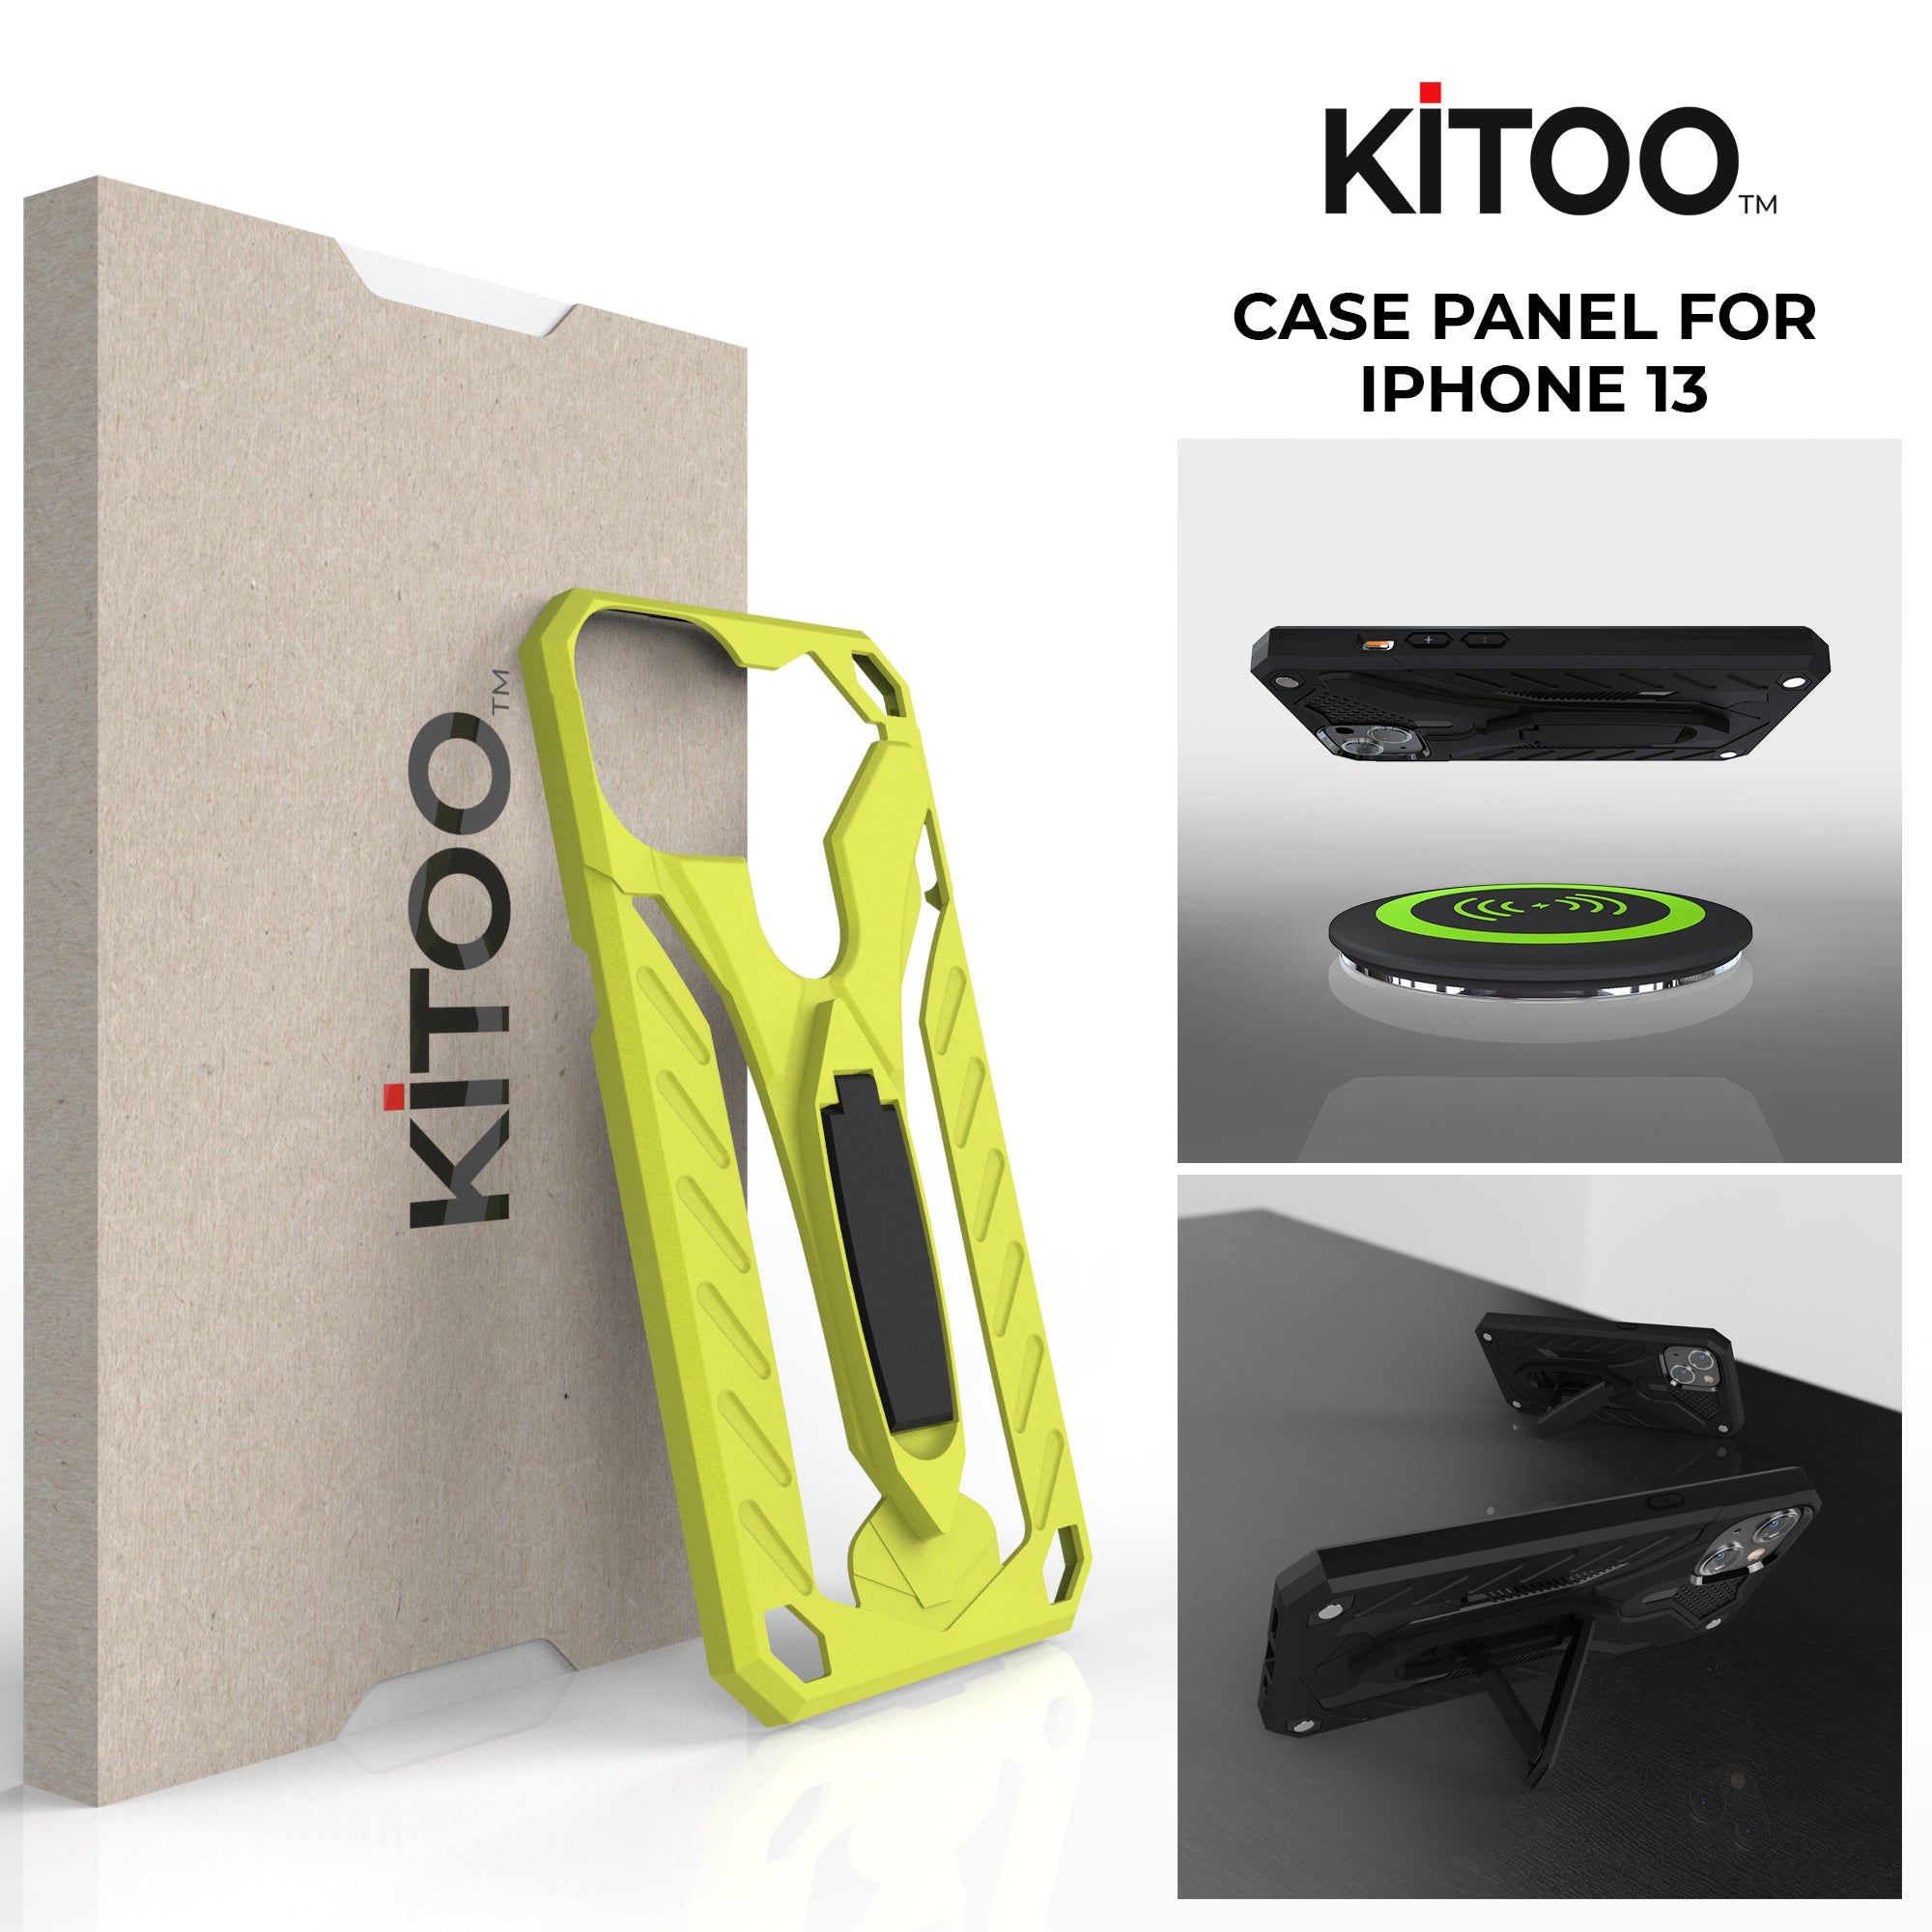 Kitoo Kickstand Panel Designed for iPhone 13 case (Spare Part only) - Yellow